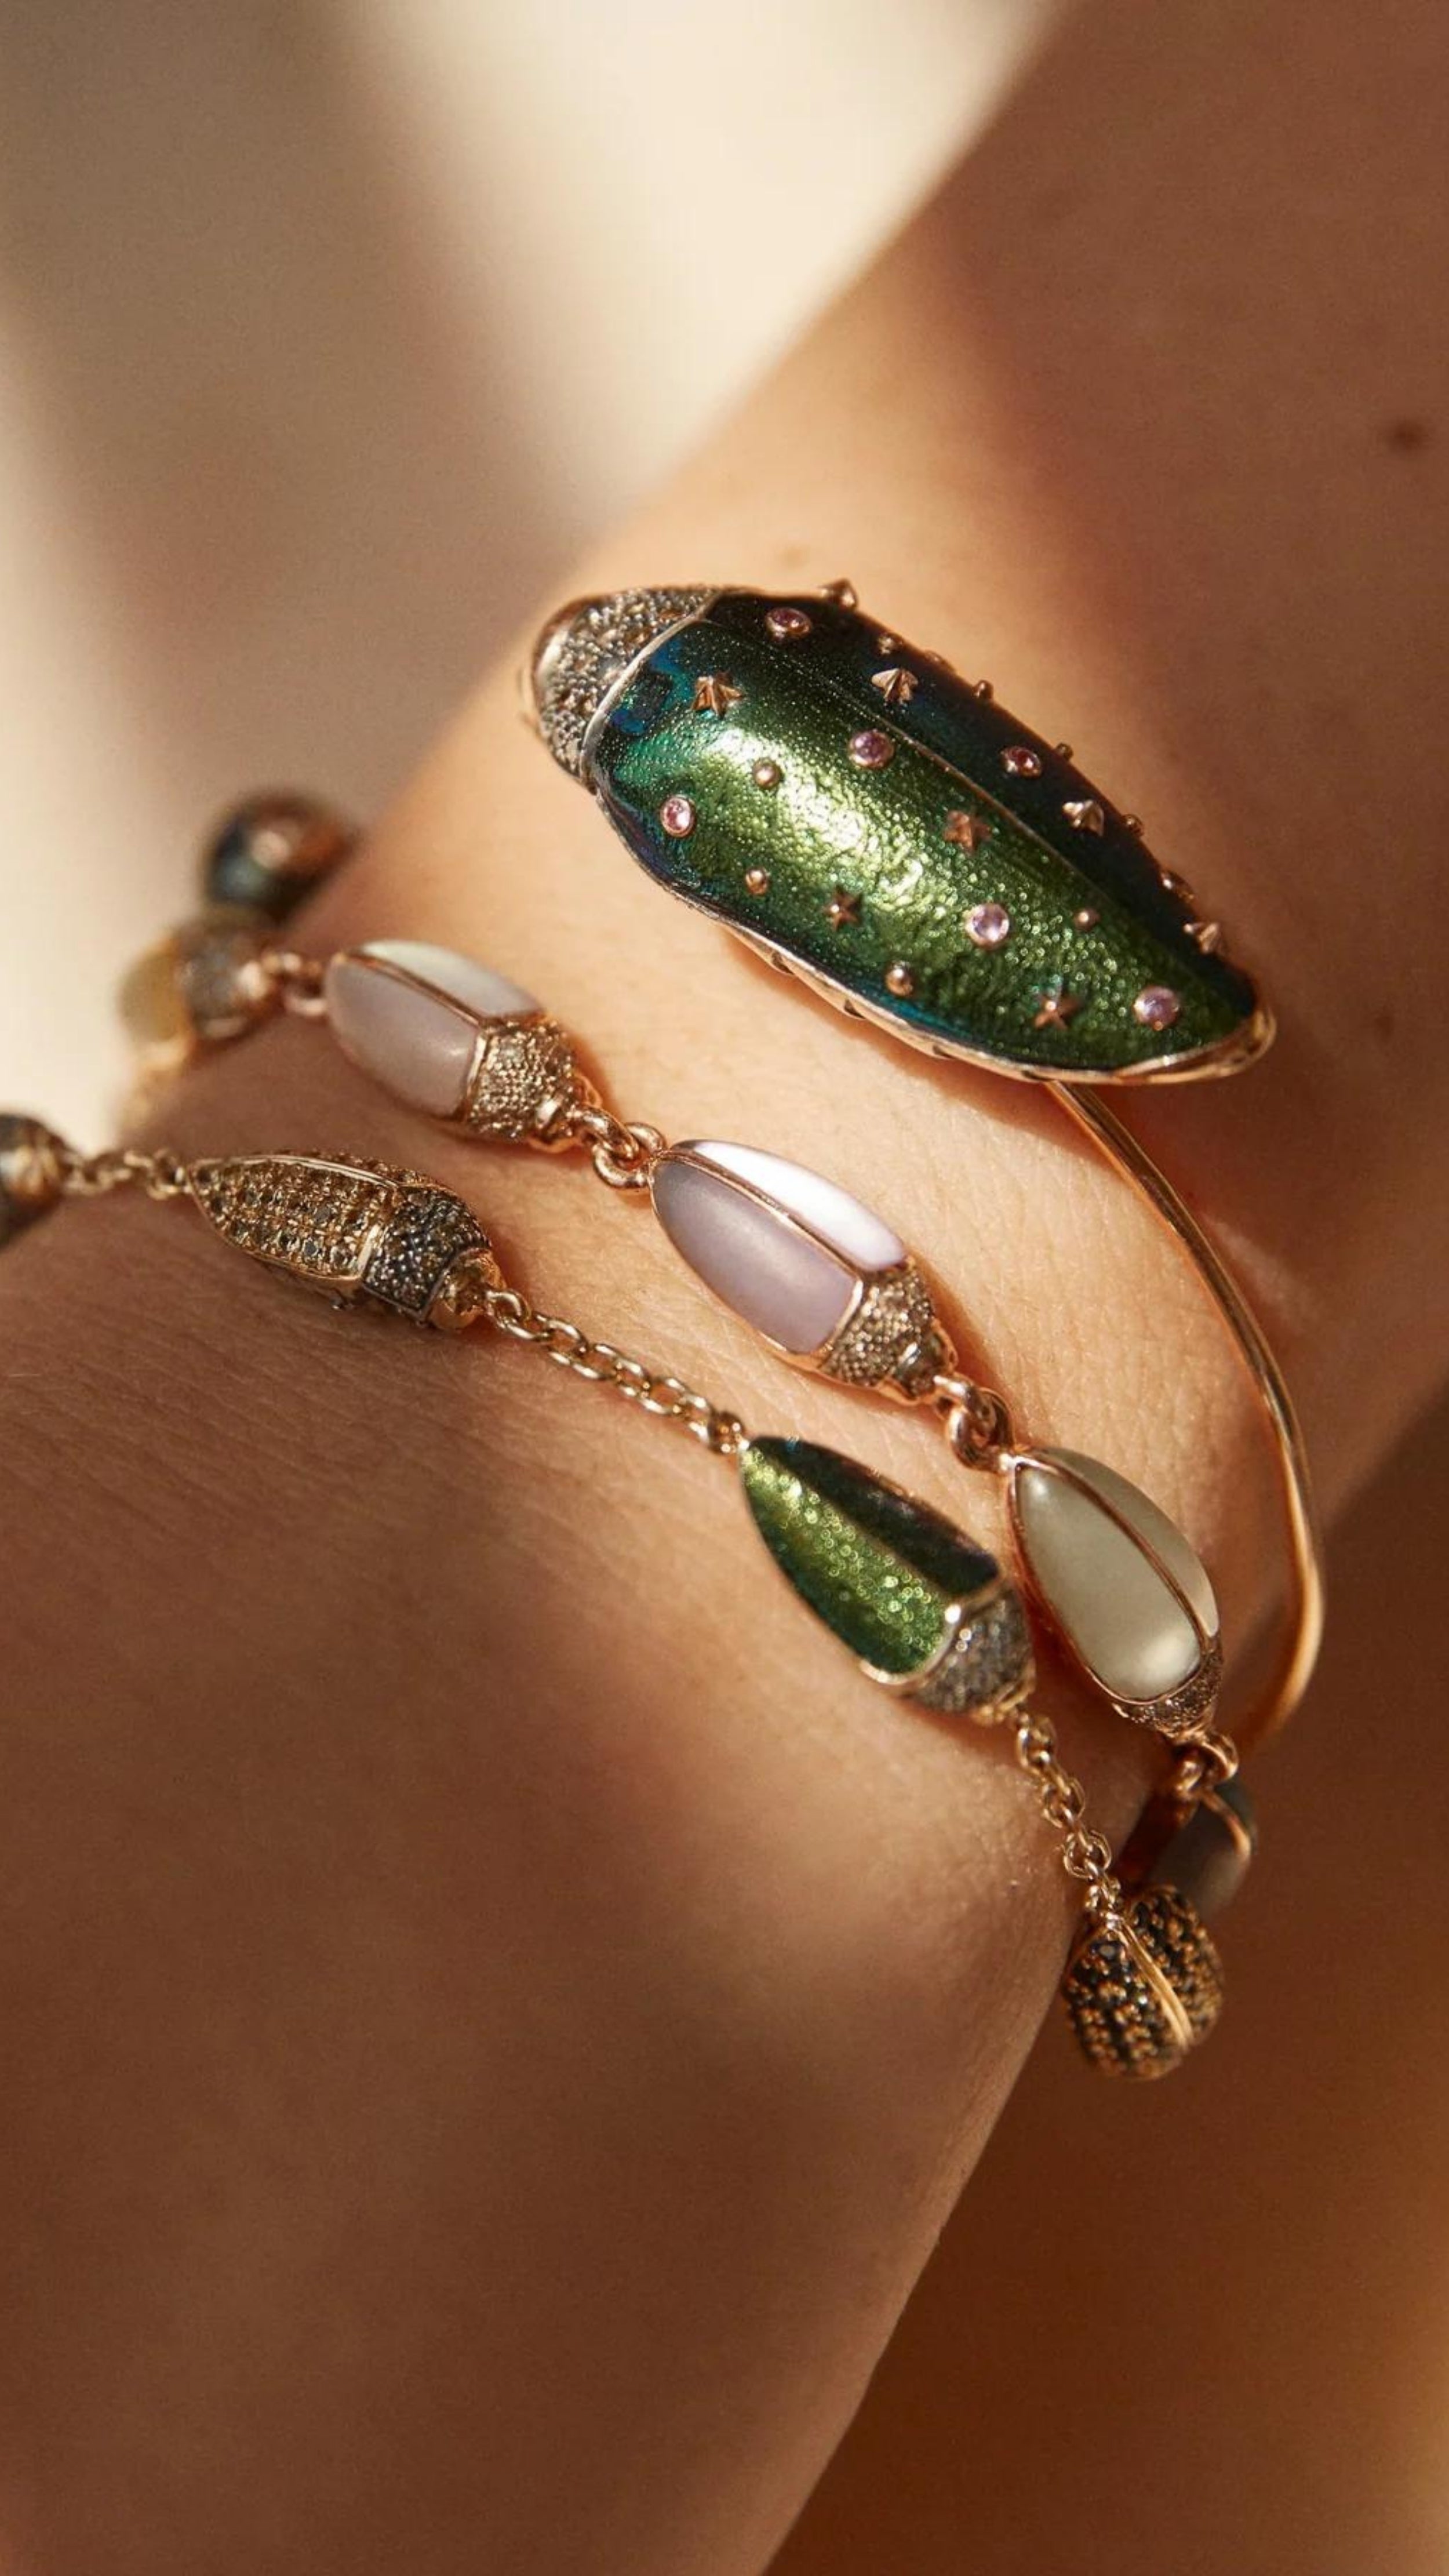 Bibi van der Velden Mini Scarab Eternity Bracelet. Made in 18k rose gold, this bracelet has nine  scarab beetles, each made with translucent, matte gemstones in soft shades. The beetles&#39; heads are paved with pale brown diamonds. Shown being worn on an arm.